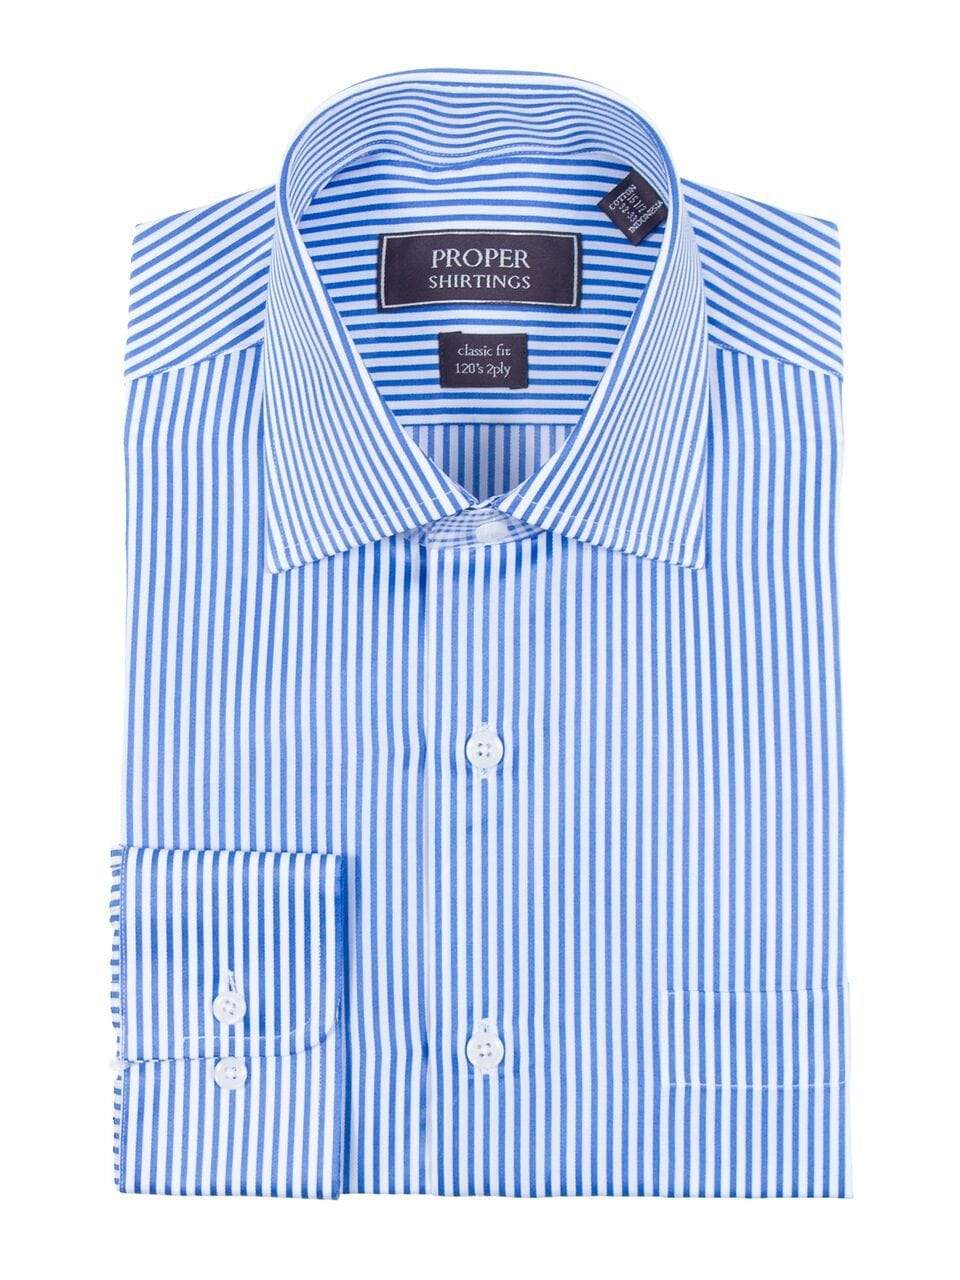 Proper Shirtings SHIRTS Mens Classic Fit White And Blue Striped 120's 2PLY Cotton Dress Shirt